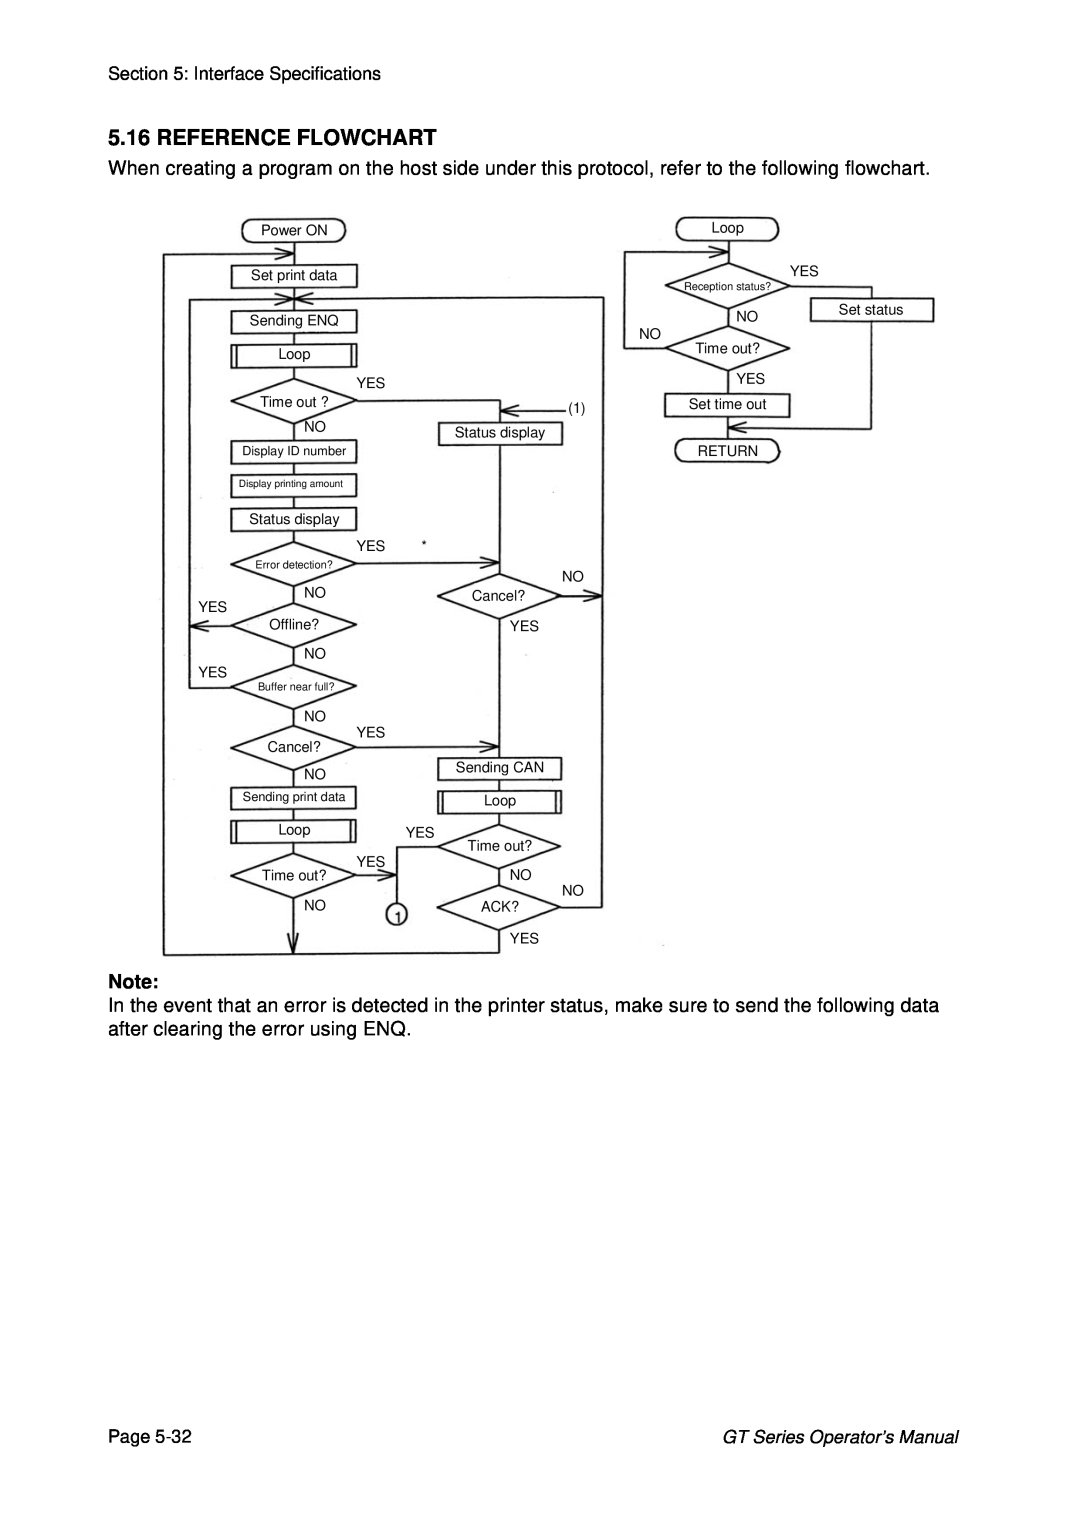 SATO GT424 manual Reference Flowchart, Reception status?, Display ID number, Error detection?, Buffer near full? 